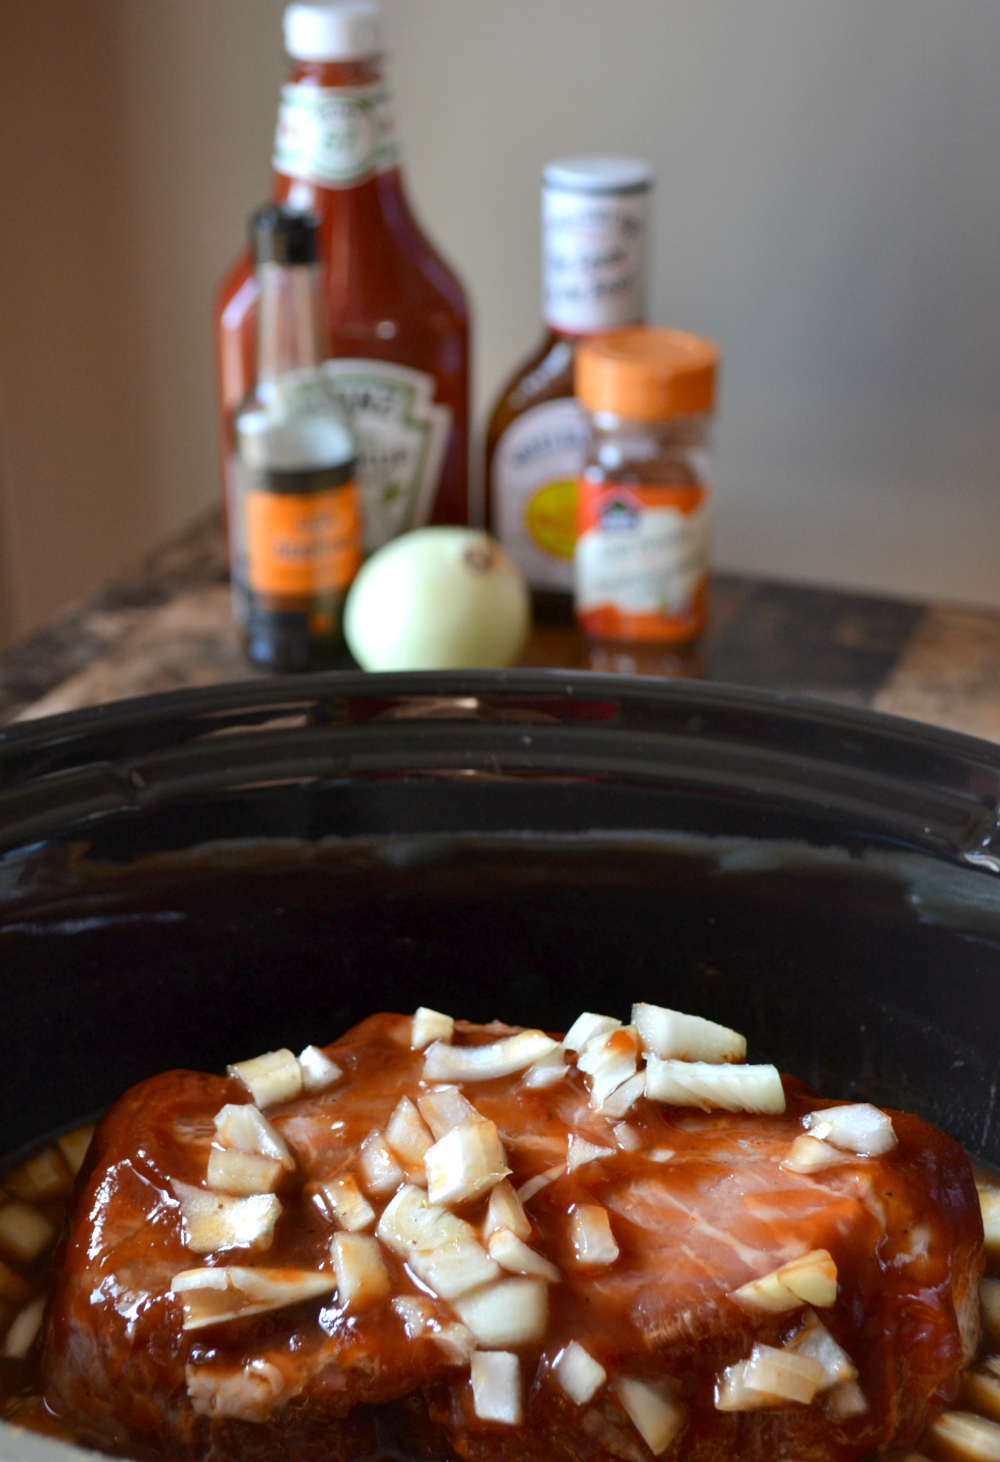 Slow cooker BBQ beef - so easy to make using items you already have on hand. Serve with kaiser buns, coleslaw, horseradish and other favorite BBQ Beef on a Bun toppings!